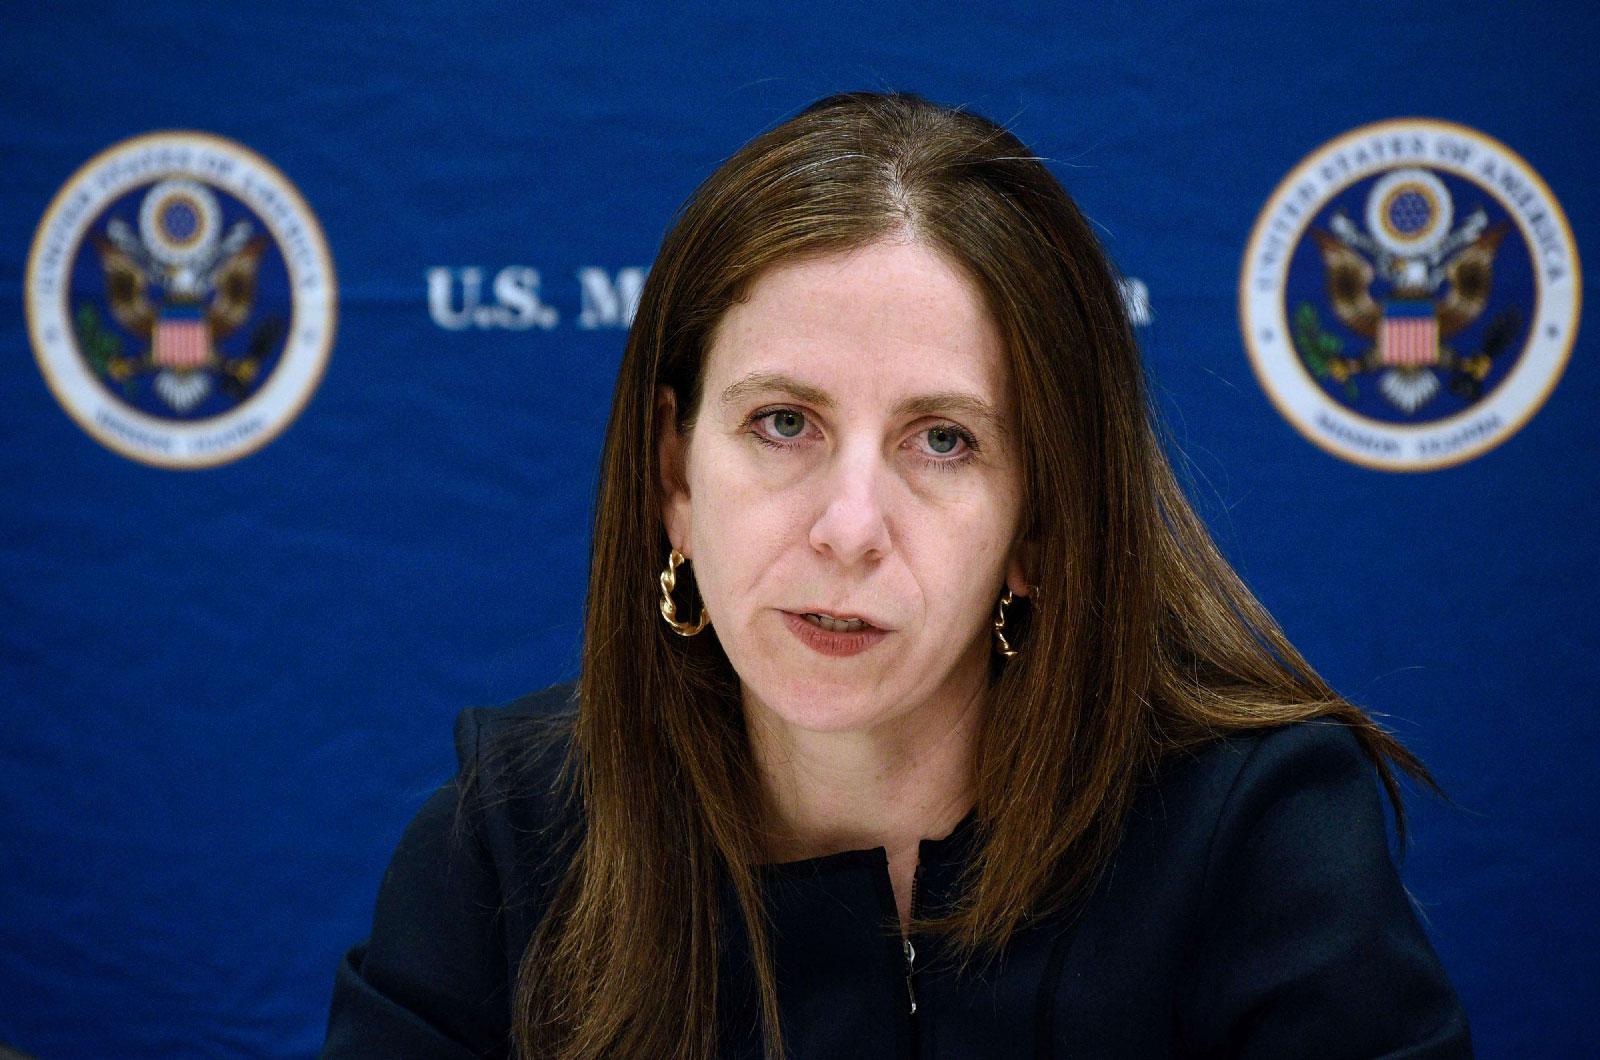 Photo taken on June 11, 2018, shows Sigal Mandelker, US Treasury Under Secretary for Terrorism and Financial Intelligence, addressing a press conference at the US Embassy in Kampala. (AFP)